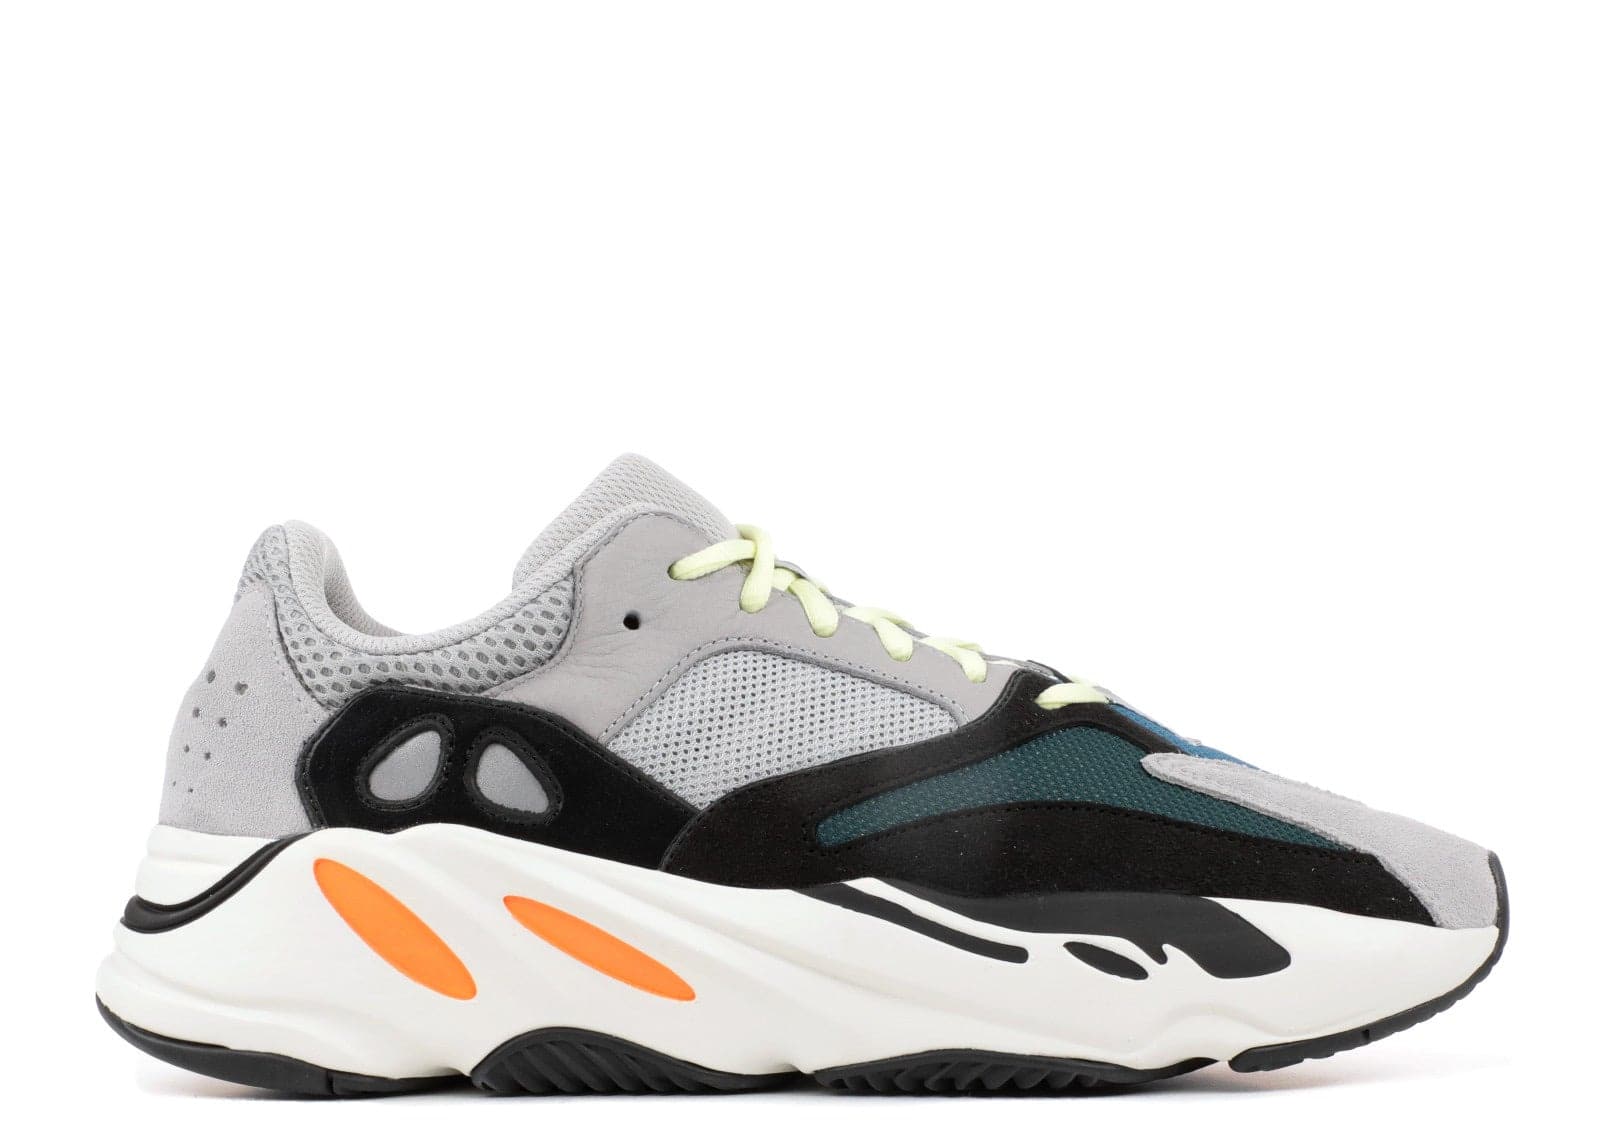 Adidas Yeezy Boost 700 Wave Runner - The Magnolia Park